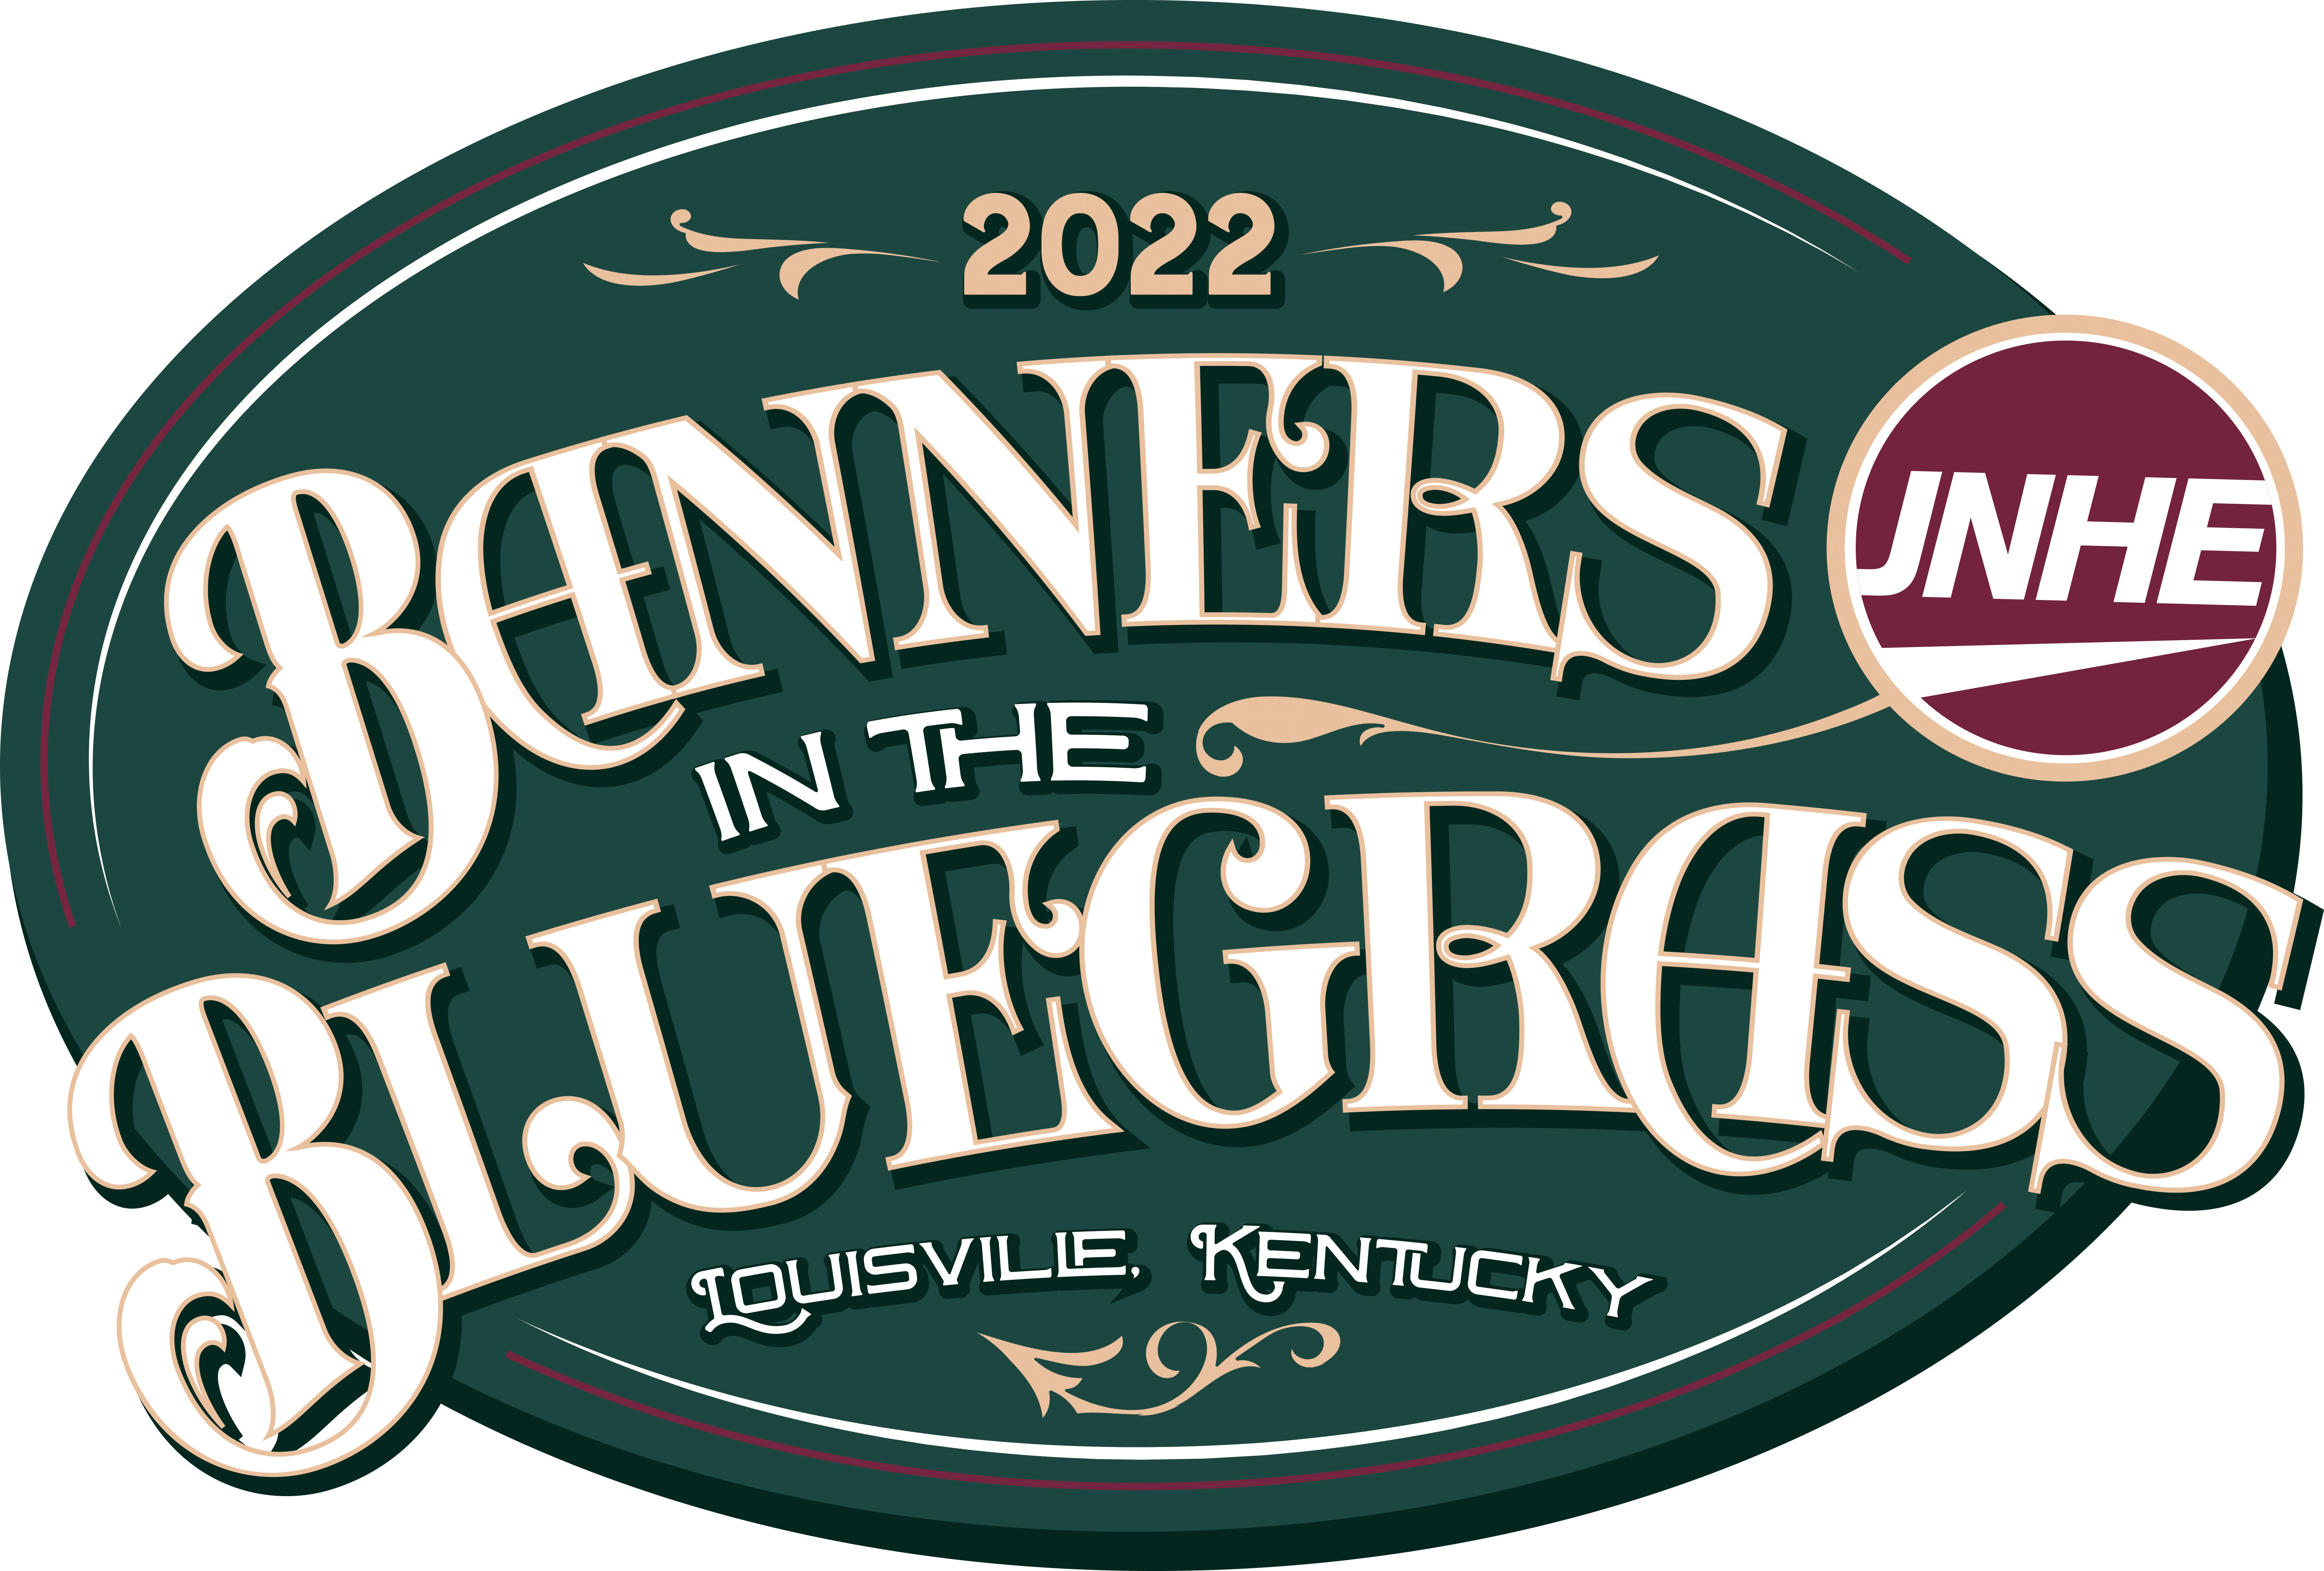 Banners in the Bluegrass Spring Sale Supports the 2022 JNHE